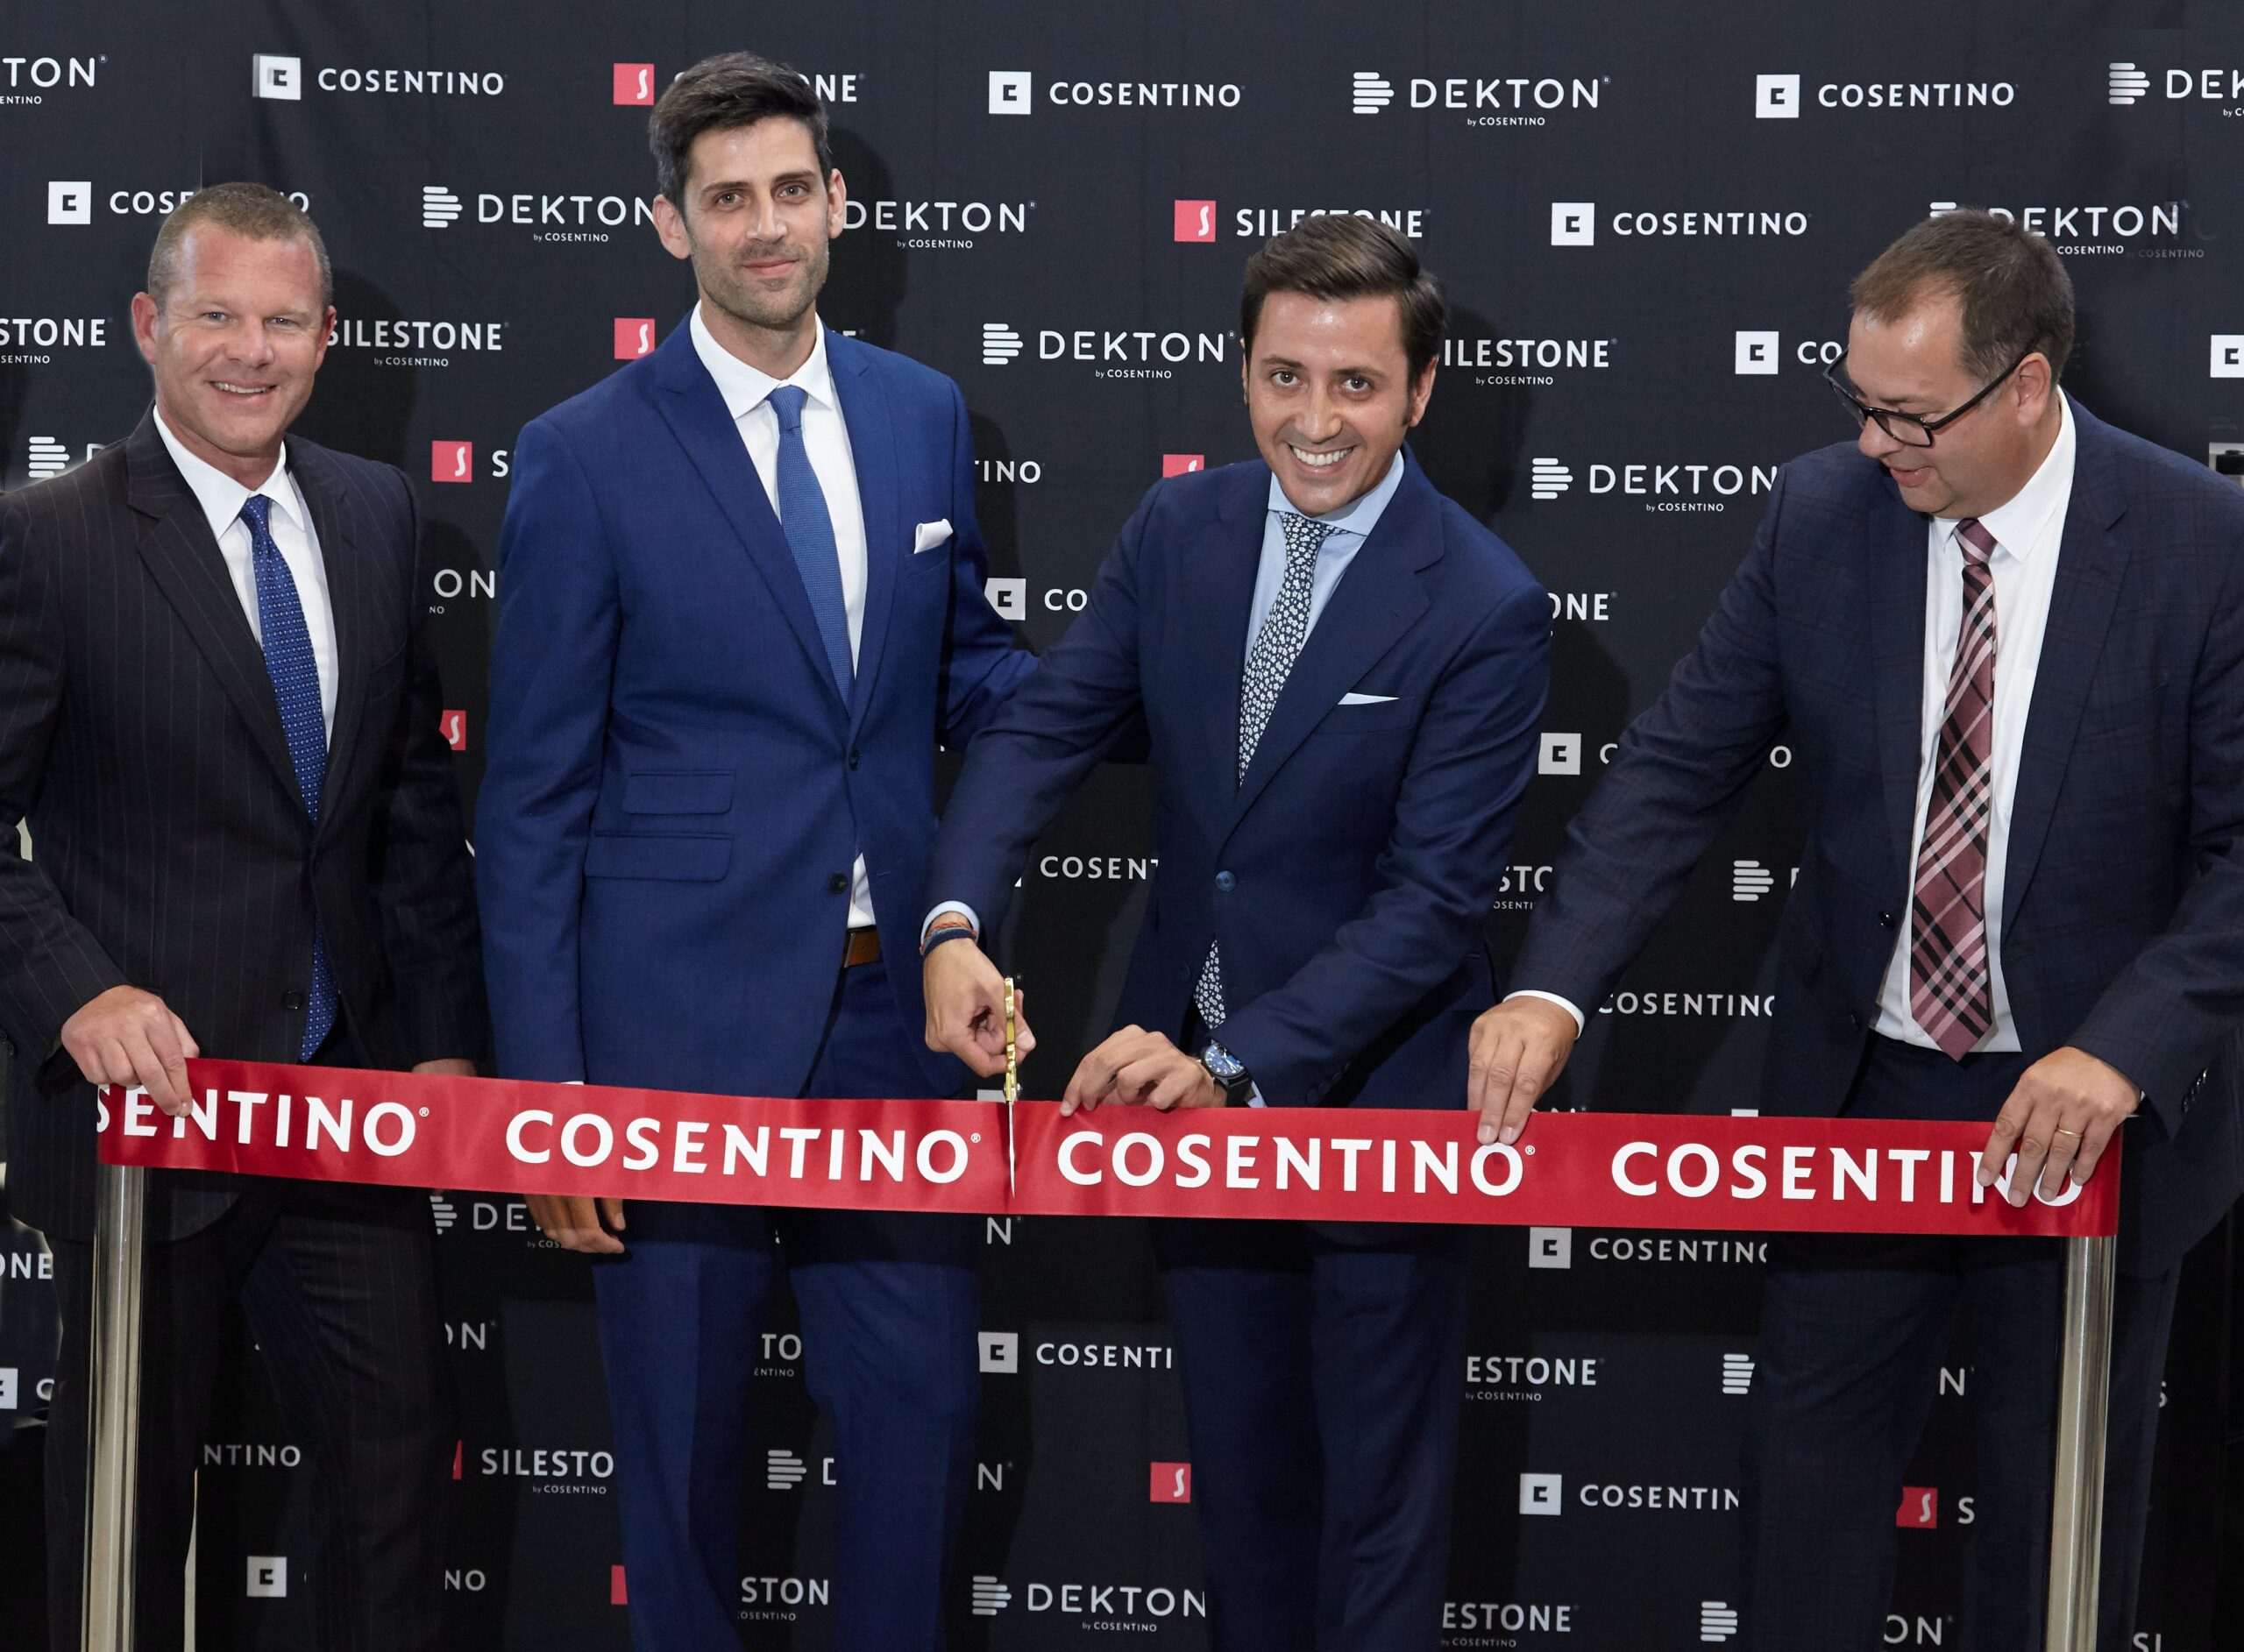 Image 35 of Cosentino Vancouver Center Opening 2018 2 1 scaled in Cosentino Officially Opens New Vancouver Centre Showroom - Cosentino